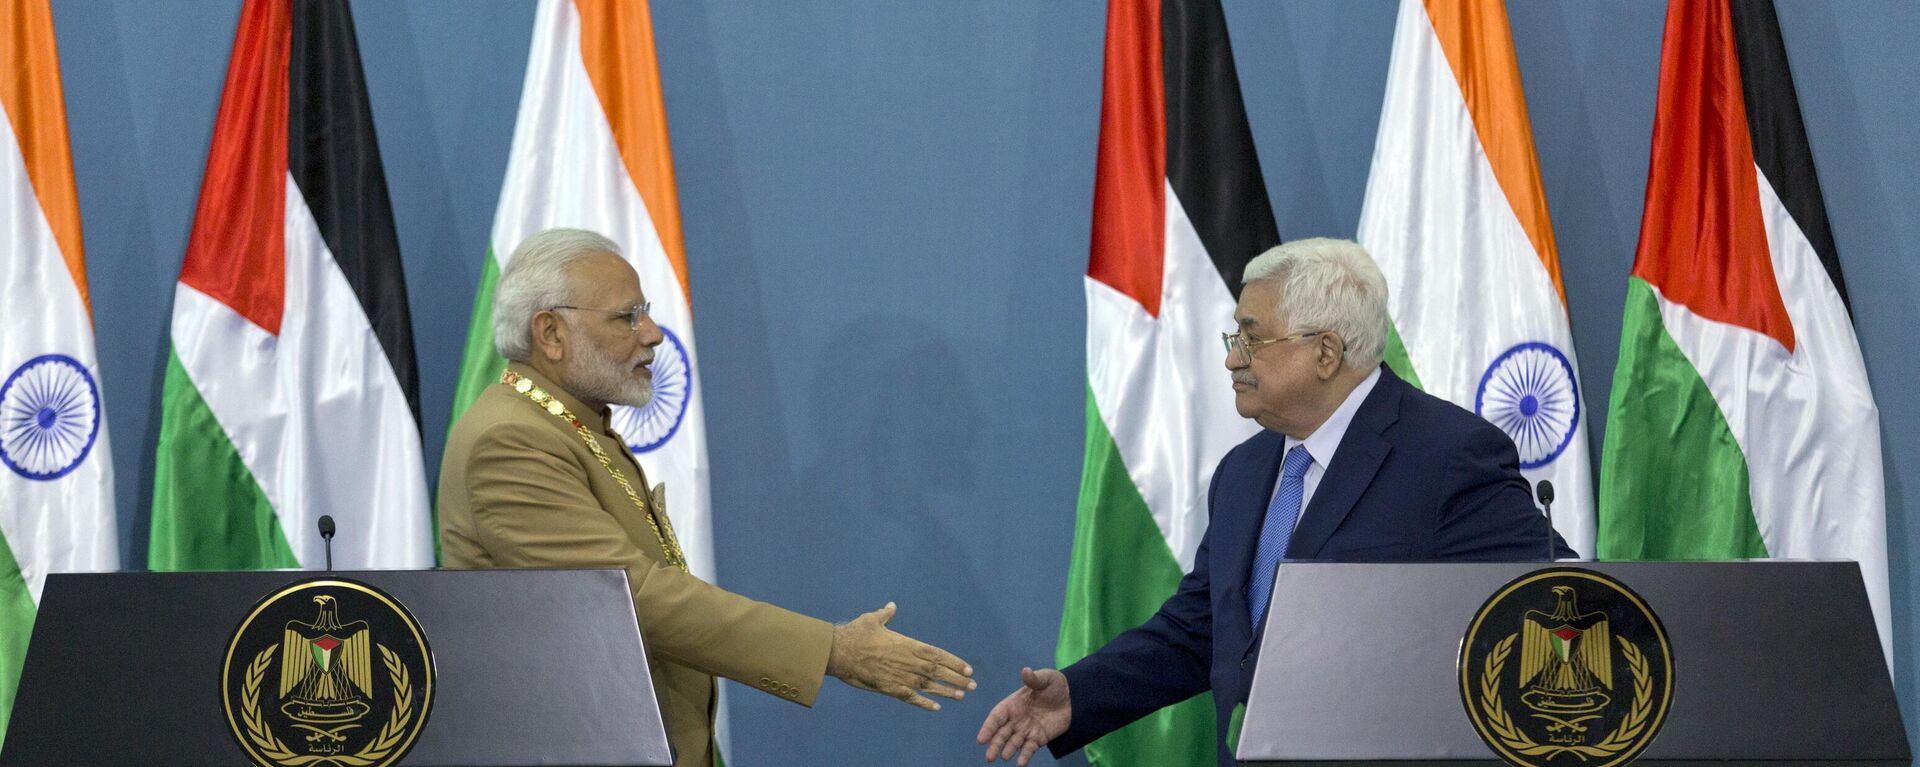 Palestinian President Mahmoud Abbas, right shakes hands with Indian Prime Minister Narendra Modi following a joint statement at the end of their meeting at the Palestinian Authority headquarters in the West Bank city of Ramallah, Saturday, Feb. 10, 2018.  - Sputnik India, 1920, 10.10.2023